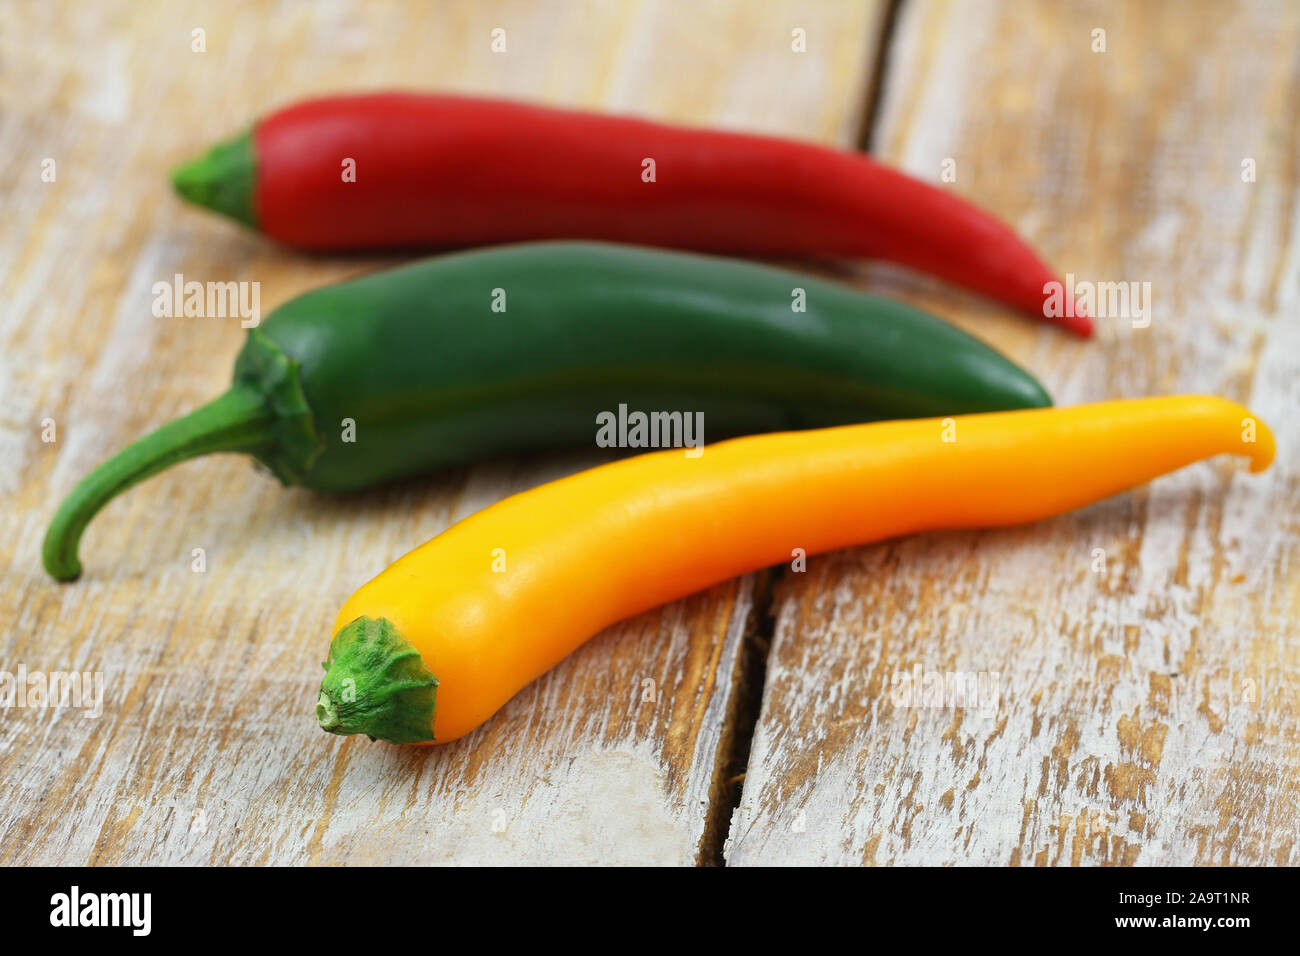 Yellow, red and green chilli peppers on rustic wooden surface Stock Photo